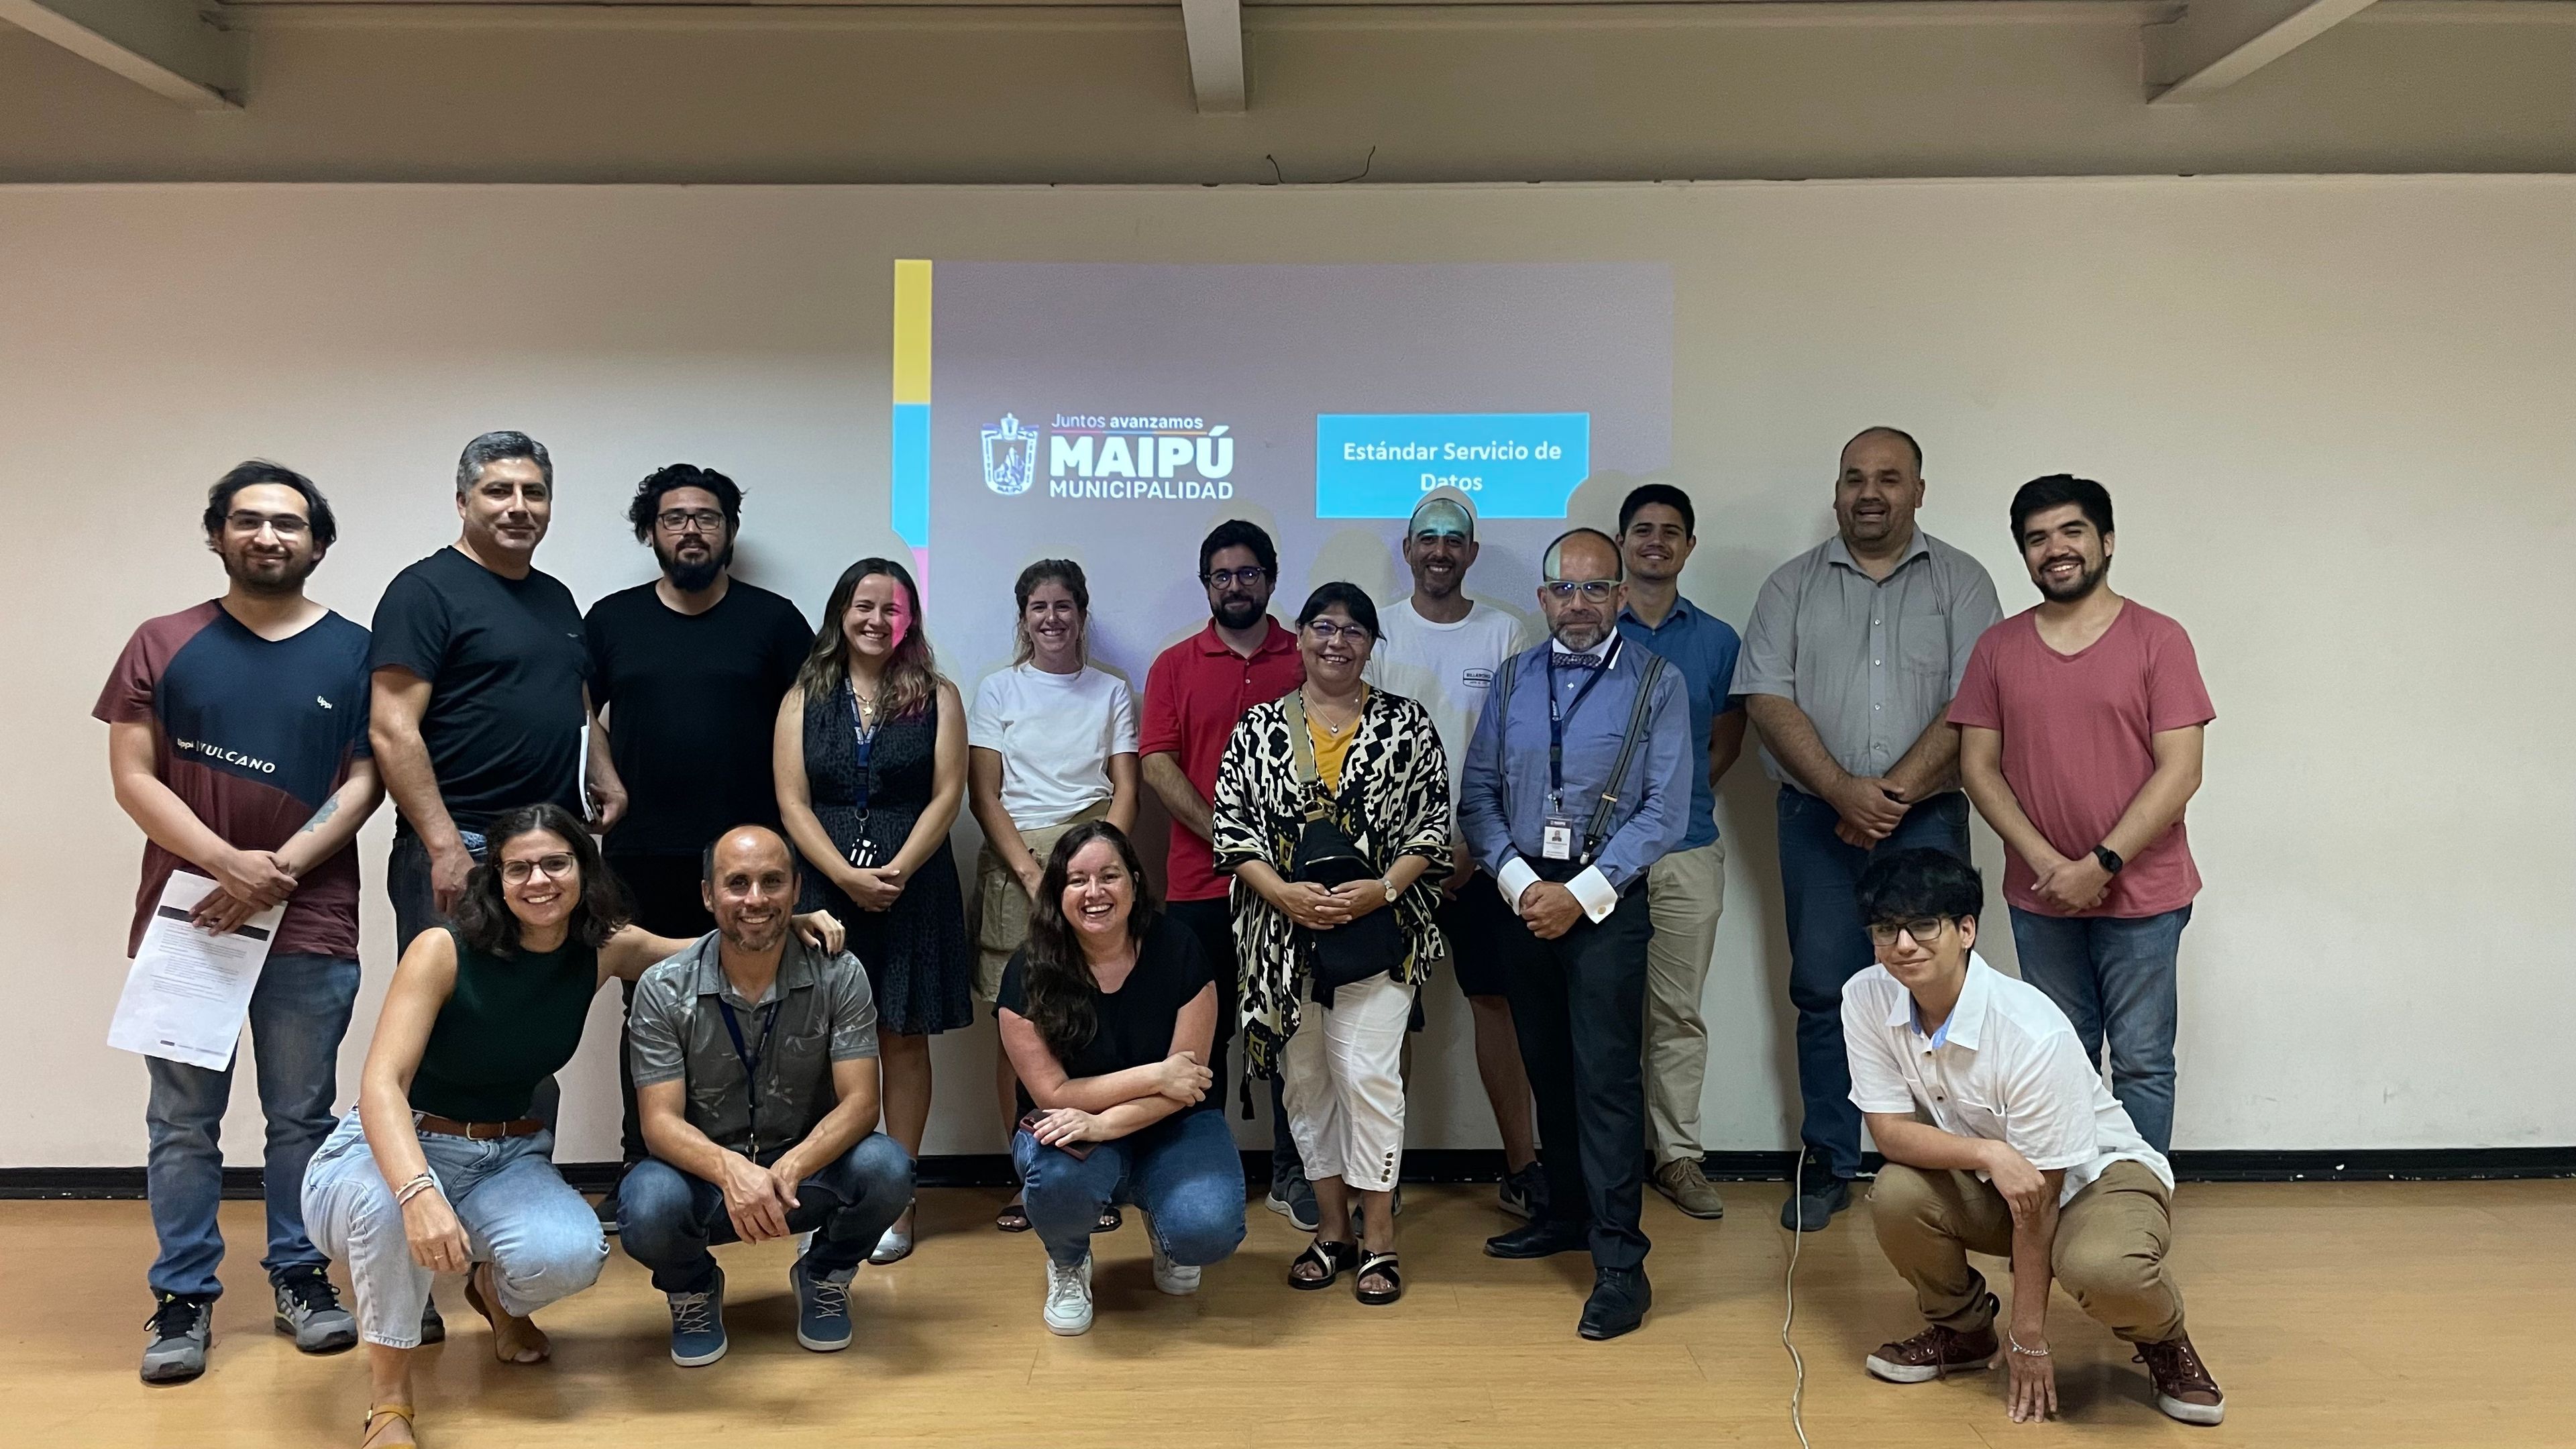 A group photo with all the participants of the Maipú project